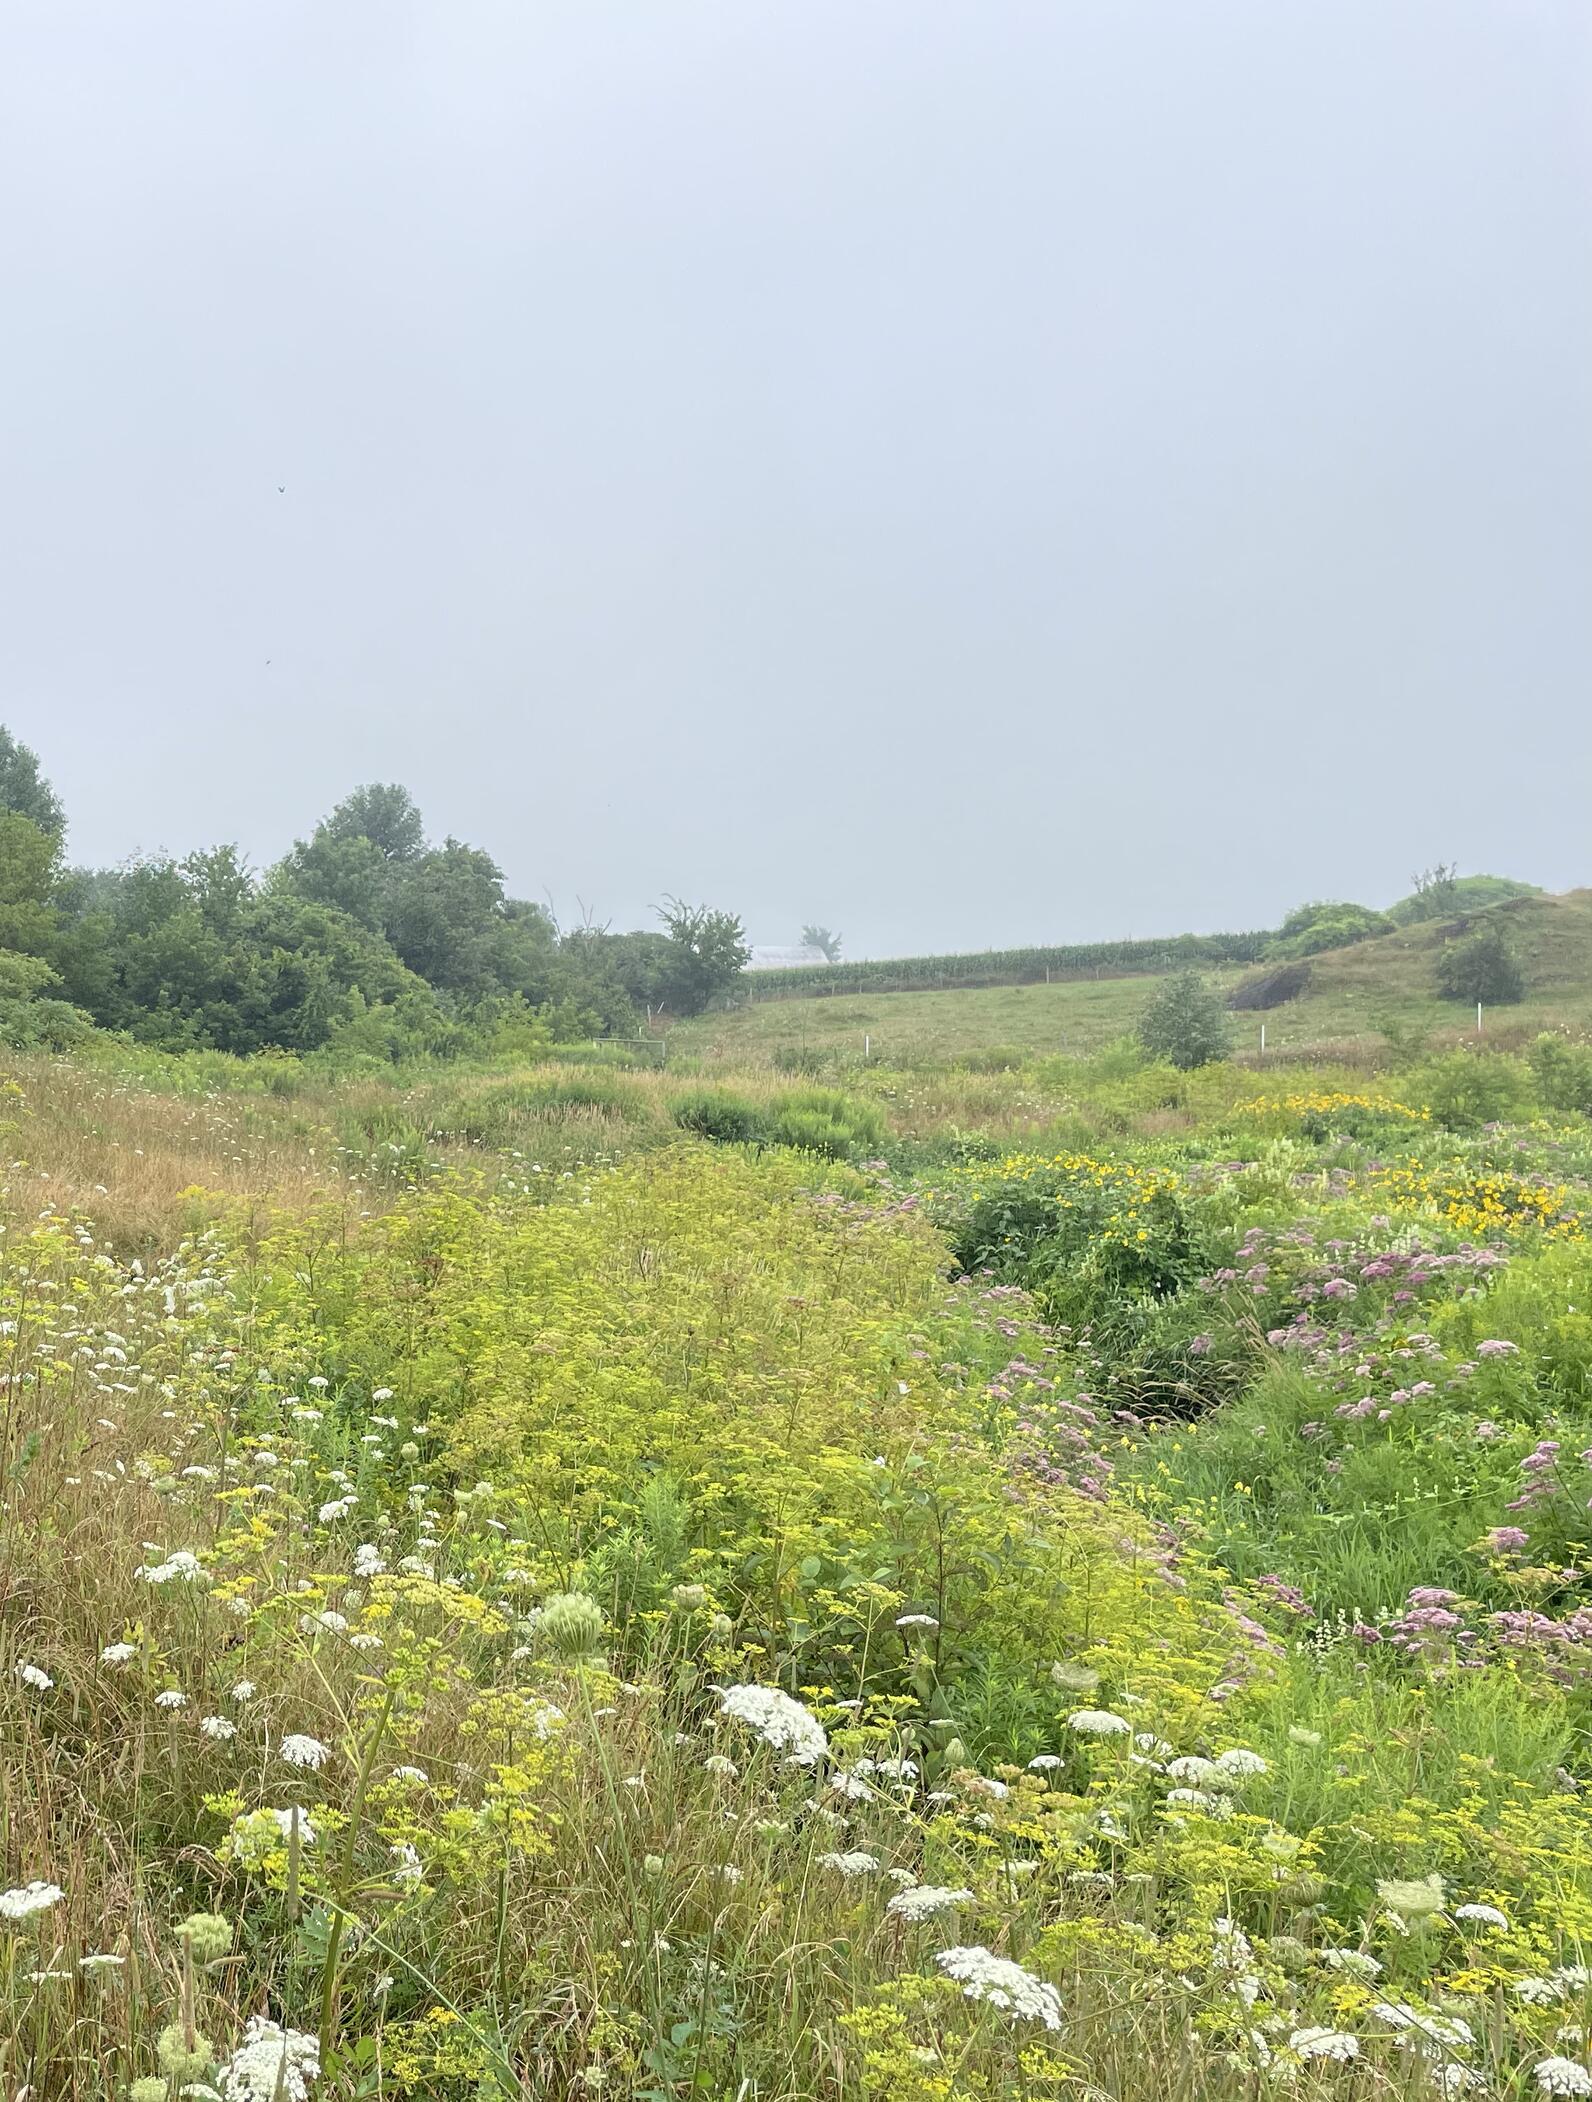 A field showing wild parsnip as the dominant vegetation